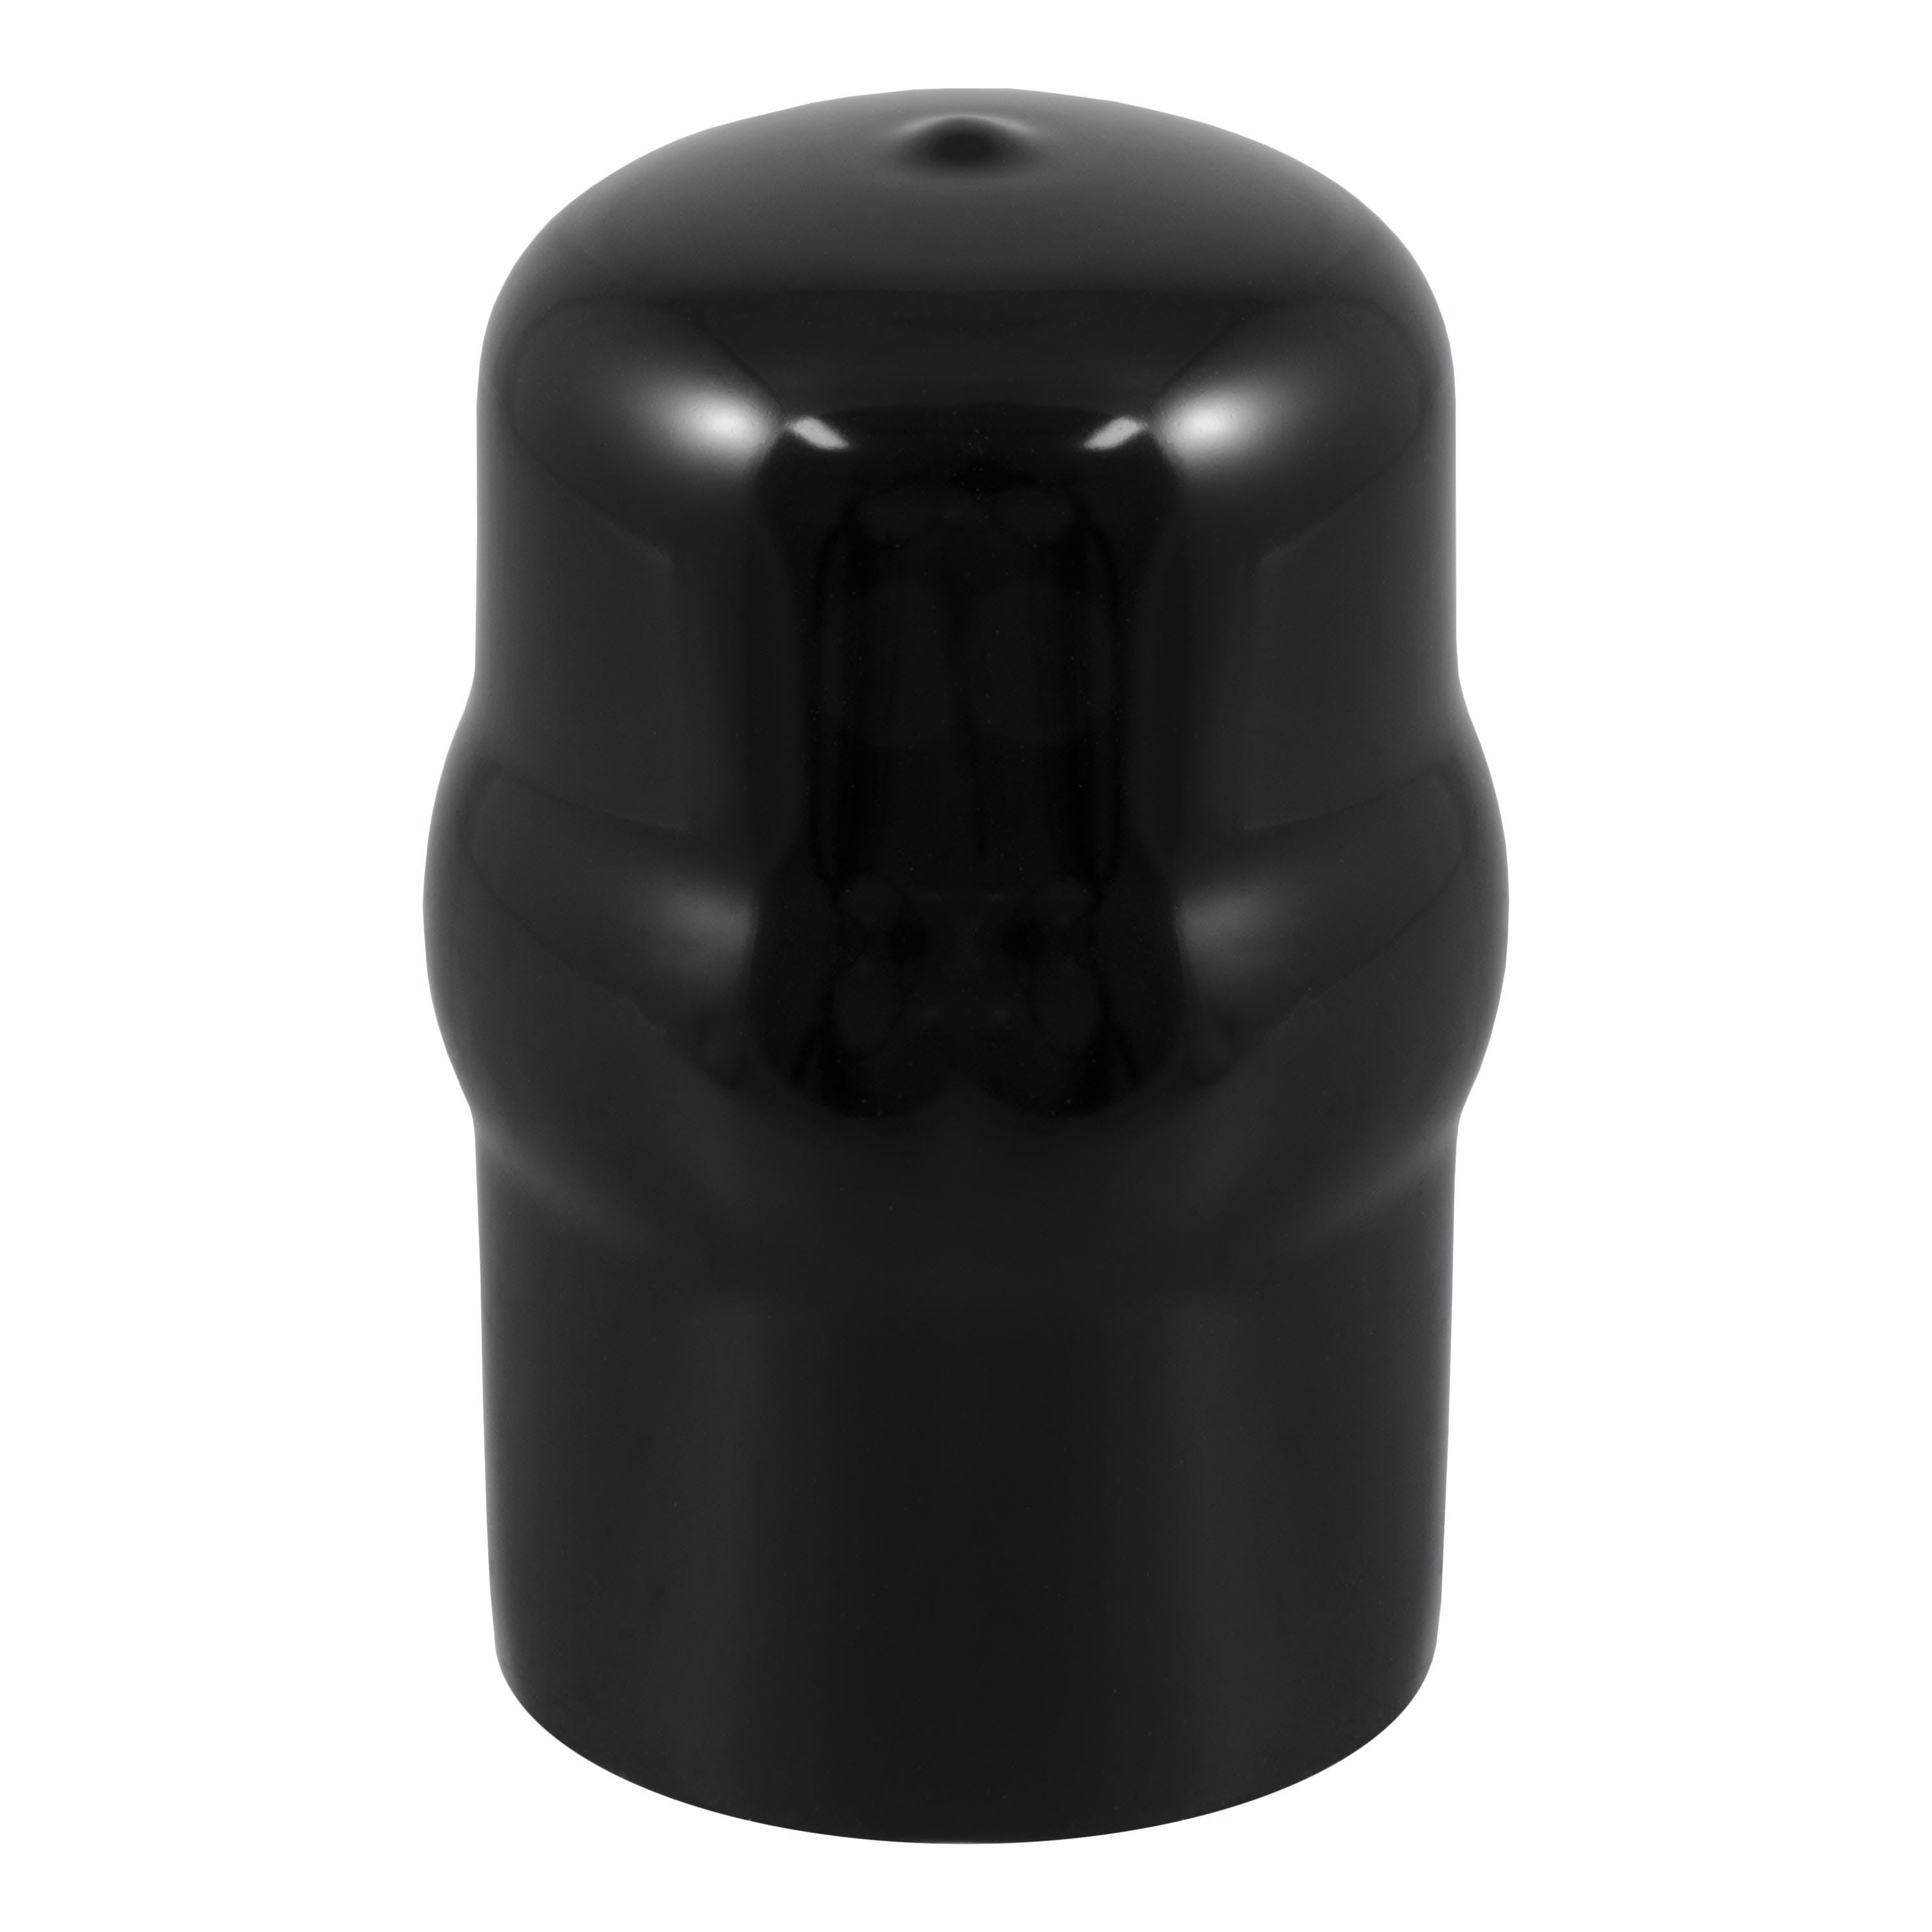 CURT 21800 Trailer Ball Cover (Fits 1-7/8 or 2 Balls, Black Rubber)